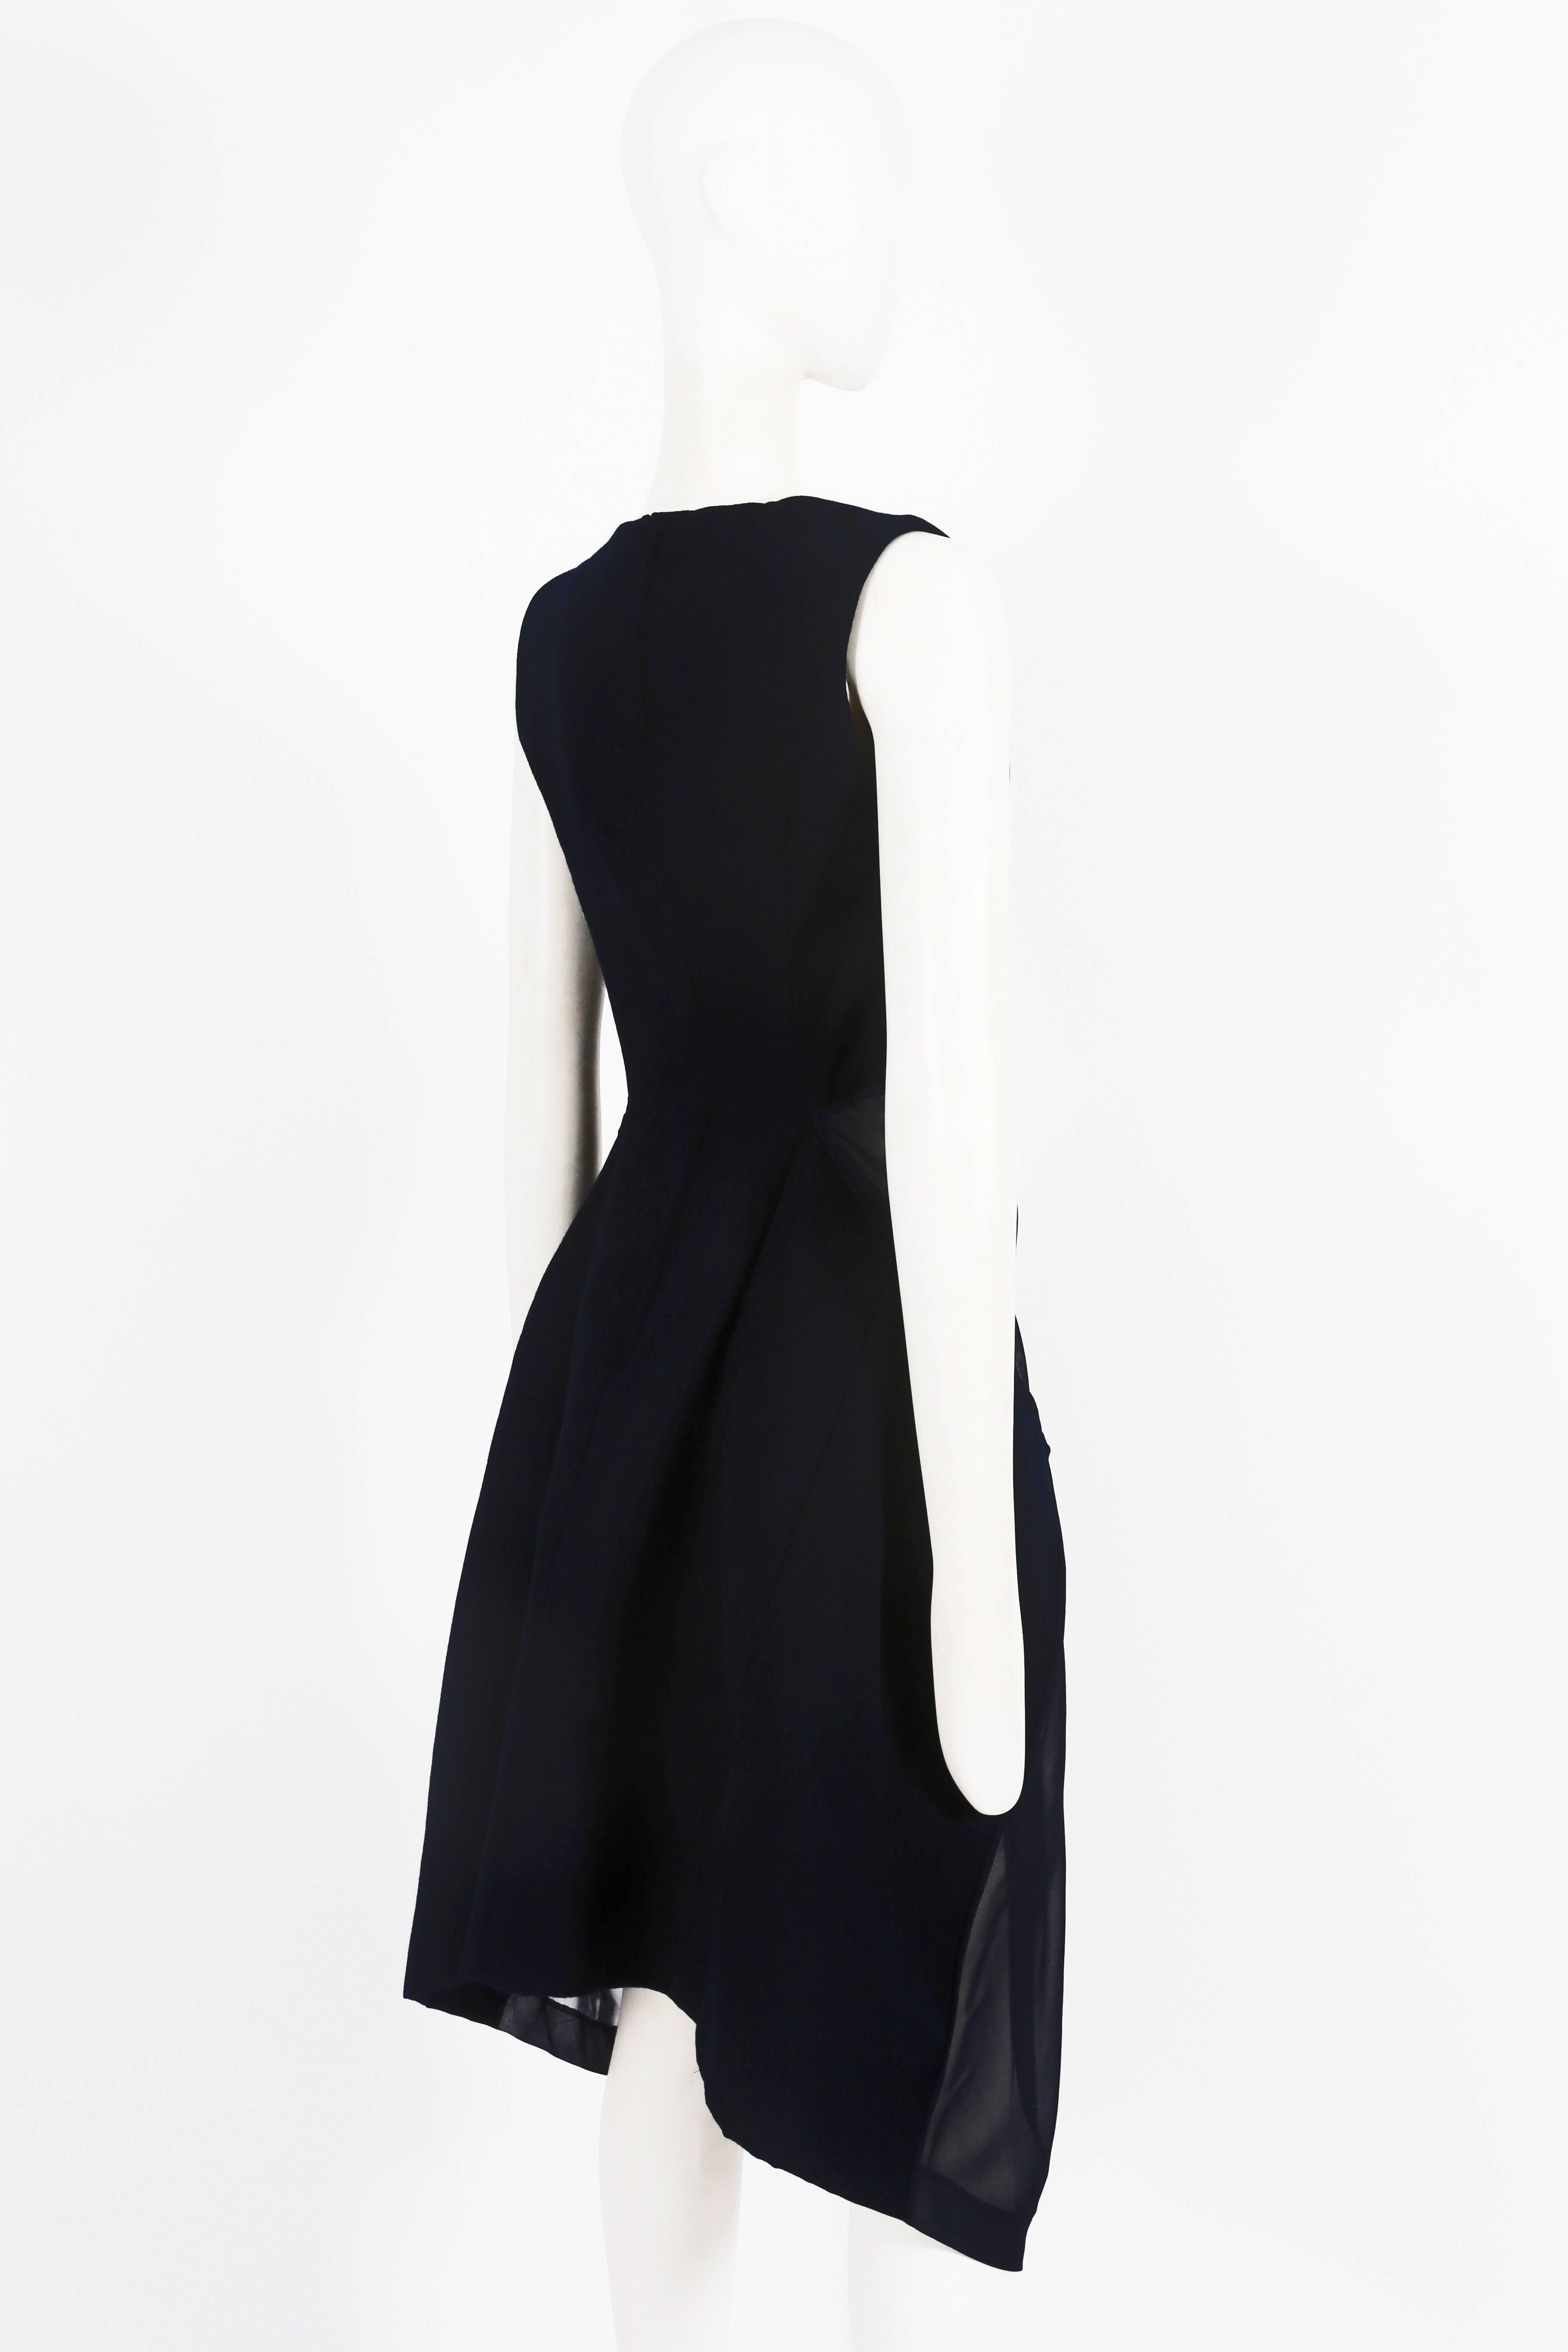 Comme des Garcons deconstructed wool and chiffon dress, fw 1997 In Excellent Condition For Sale In London, GB